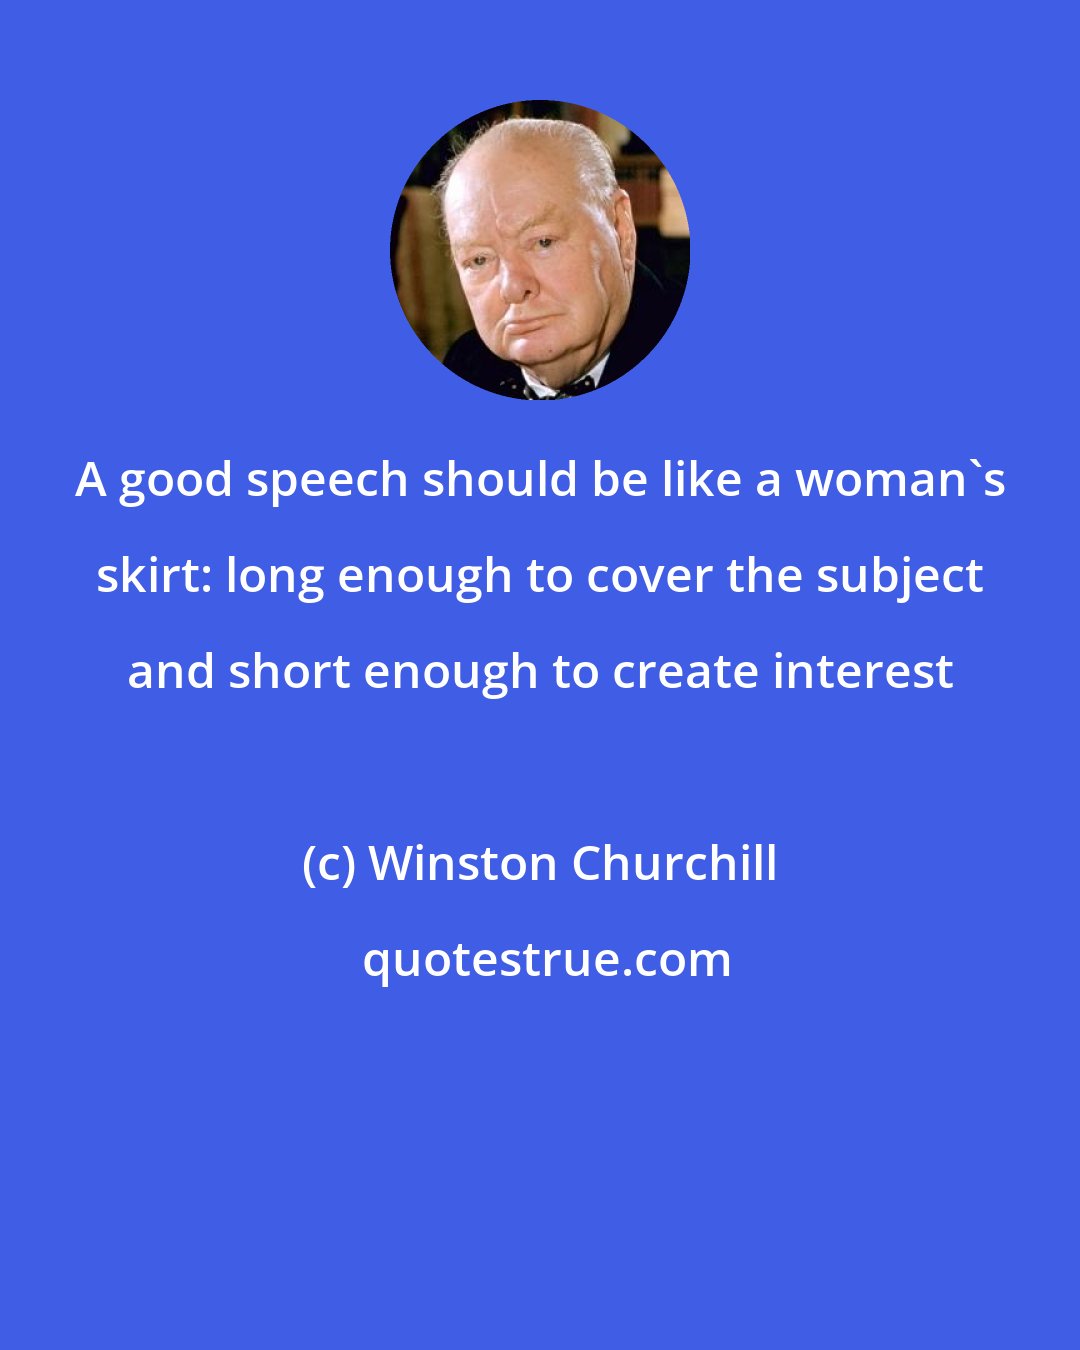 Winston Churchill: A good speech should be like a woman's skirt: long enough to cover the subject and short enough to create interest